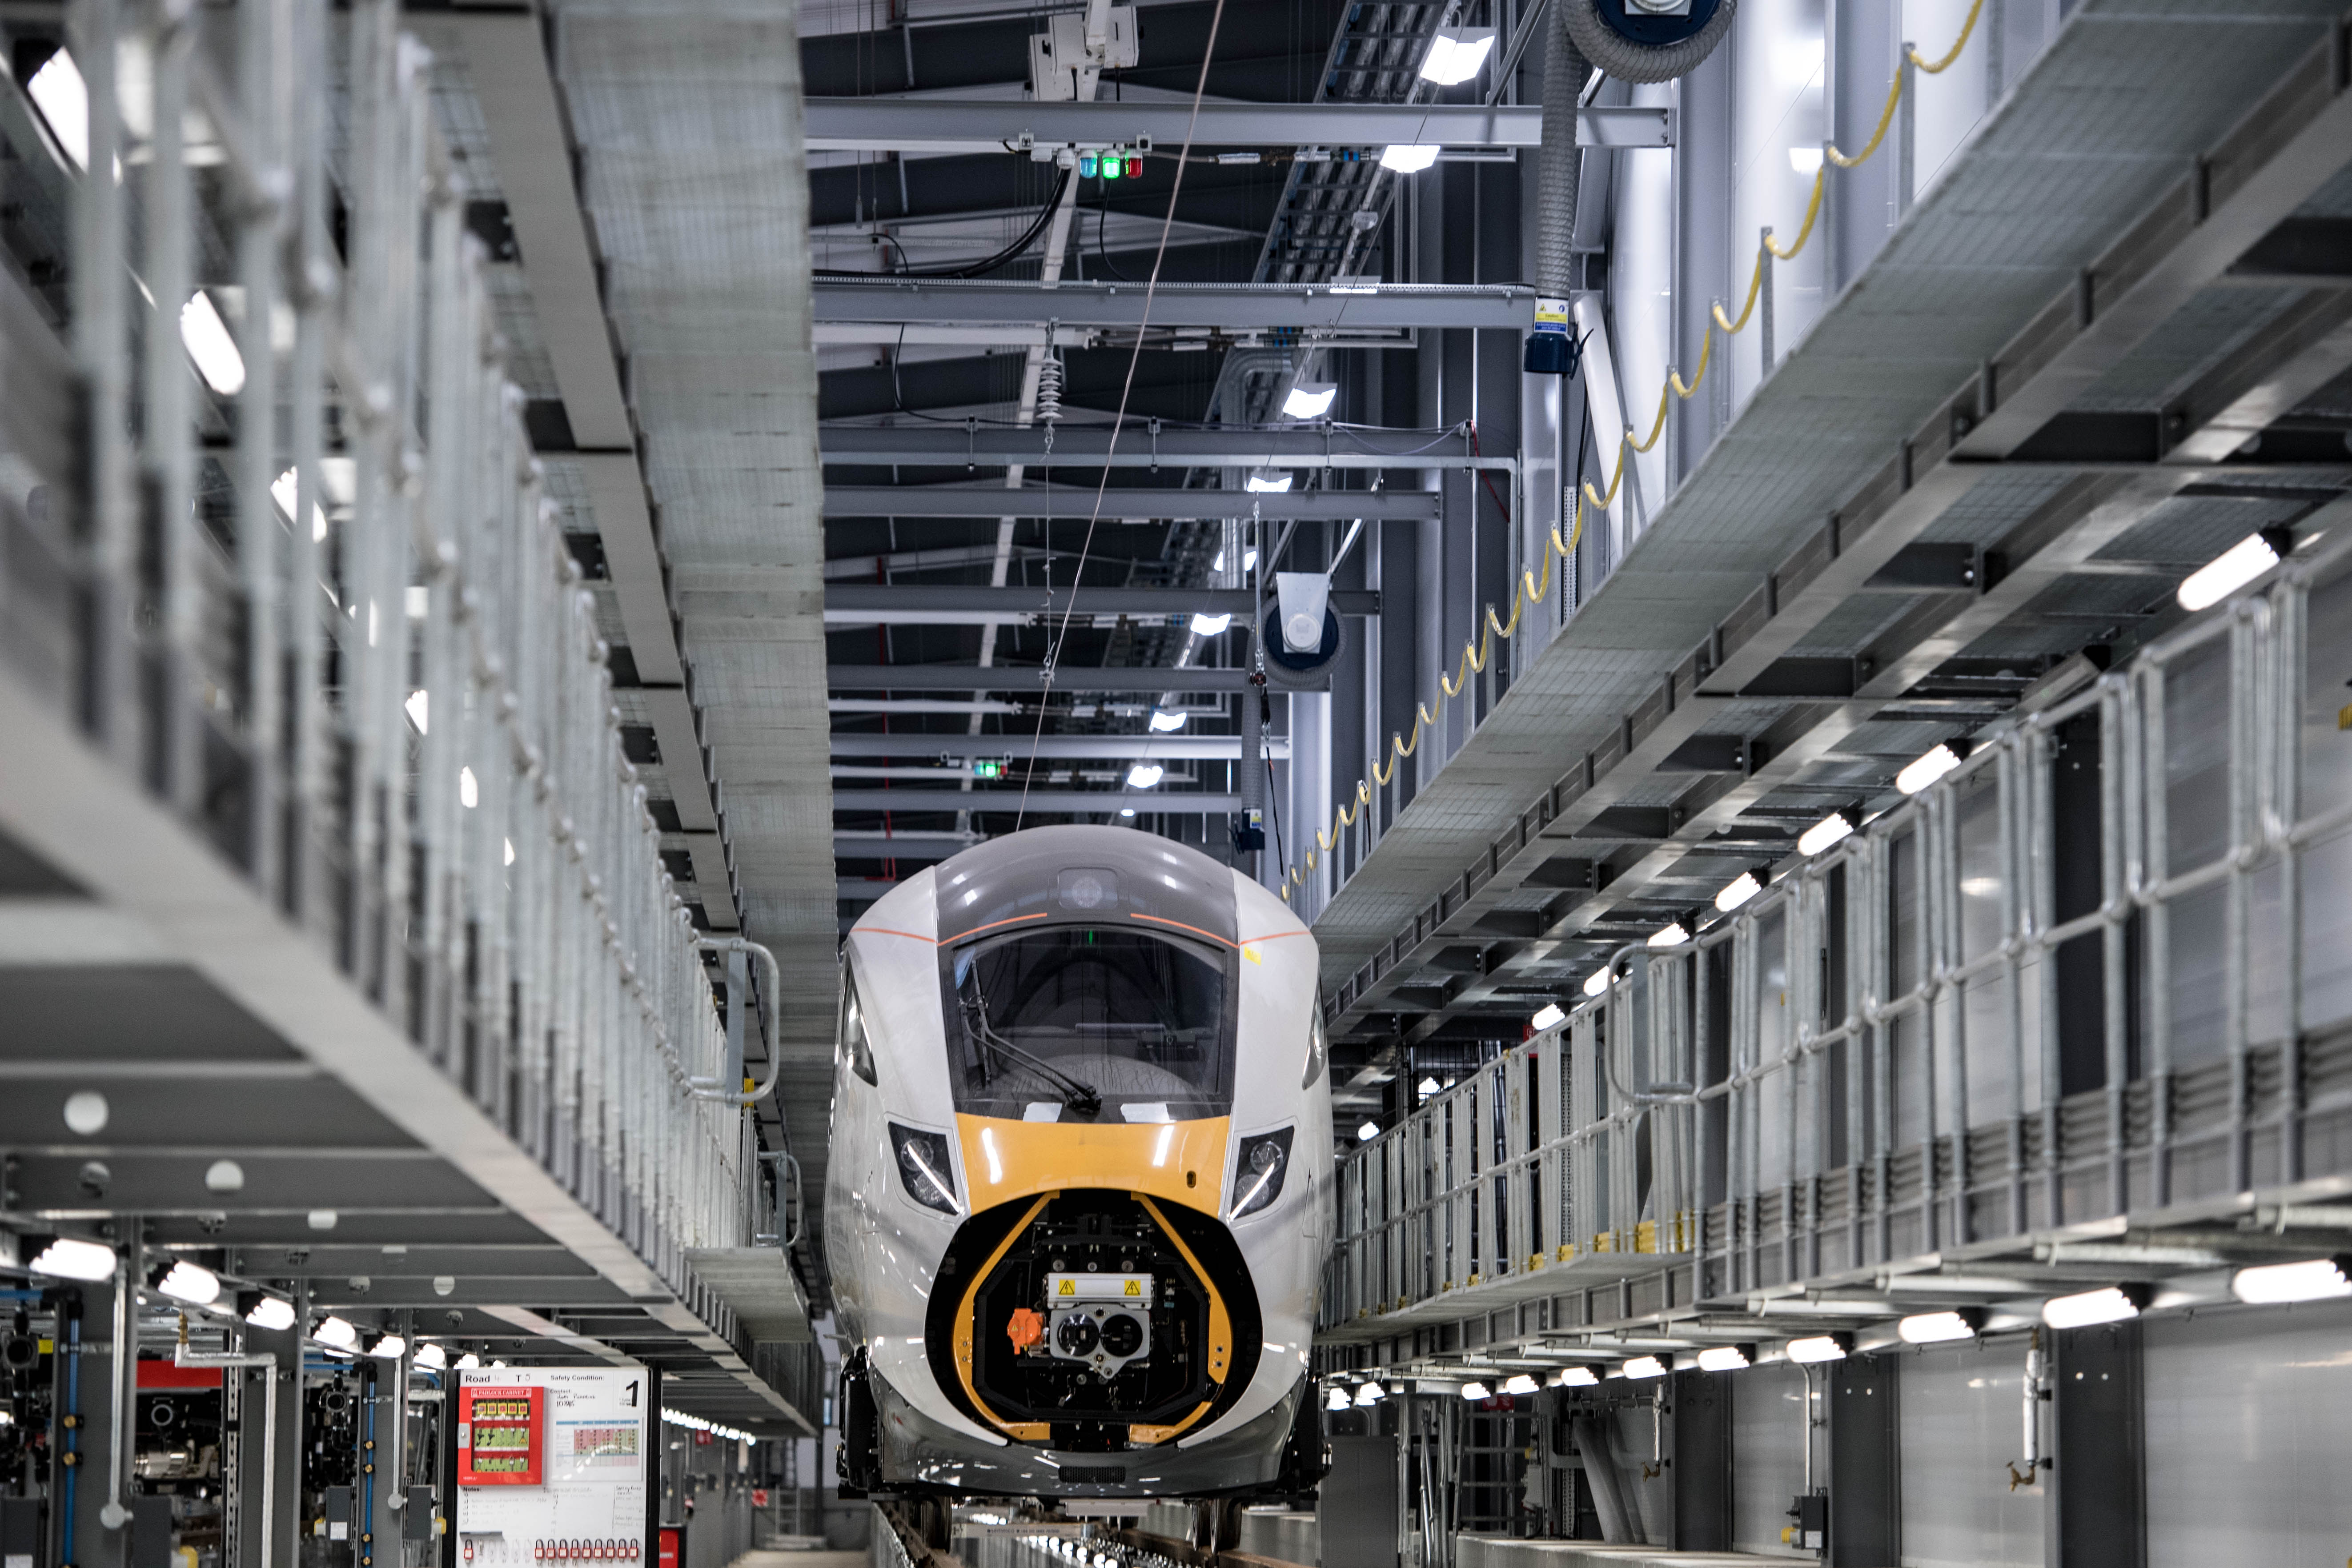 One of the new InterCity trains on the production line